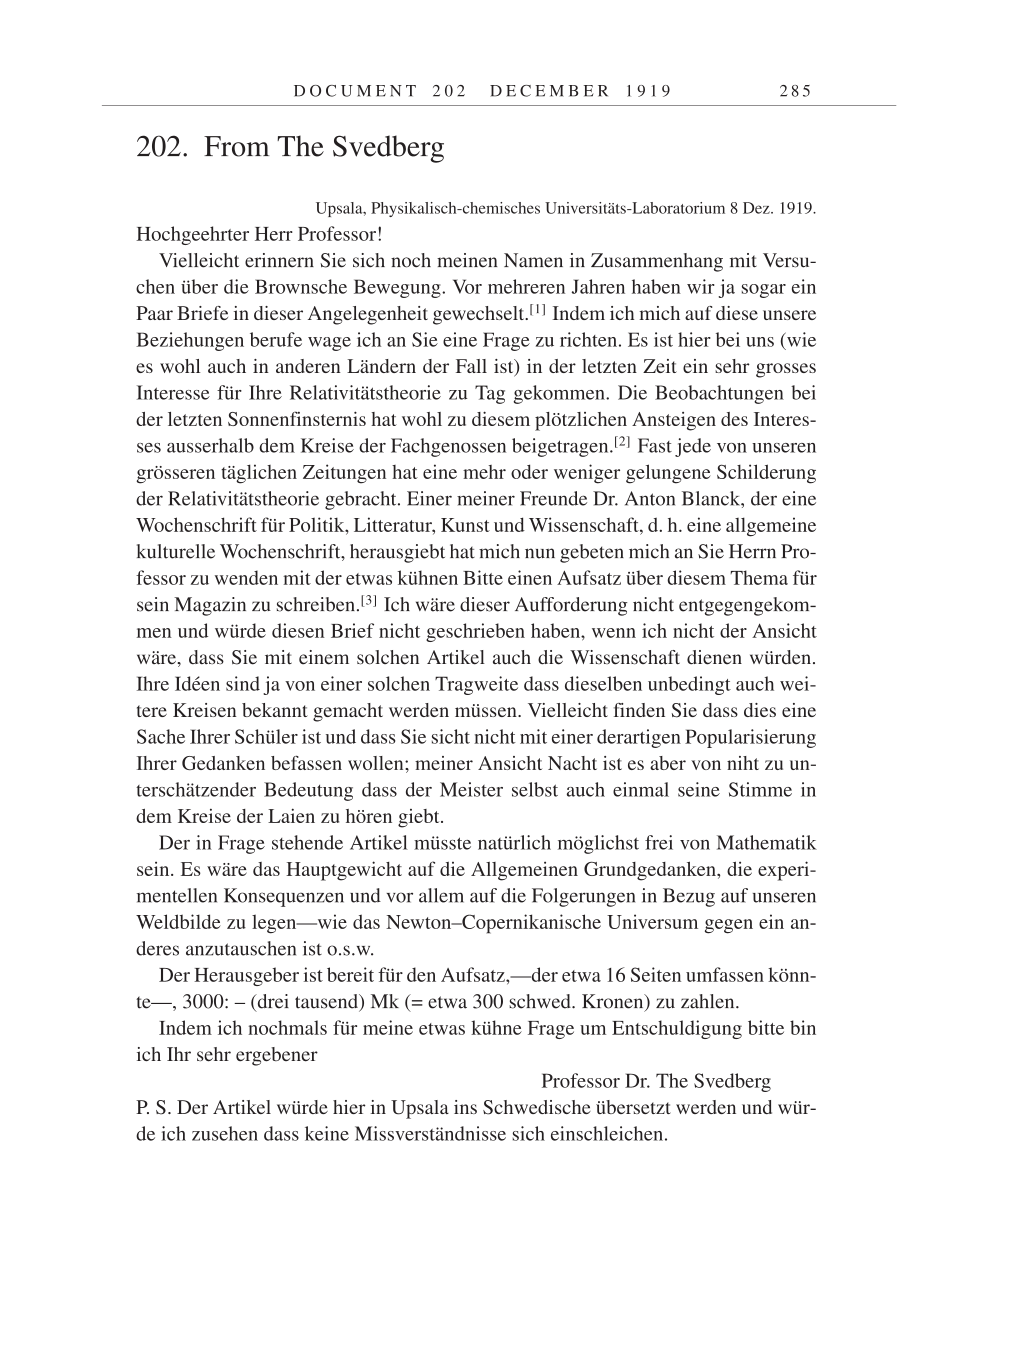 Volume 9: The Berlin Years: Correspondence January 1919-April 1920 page 285